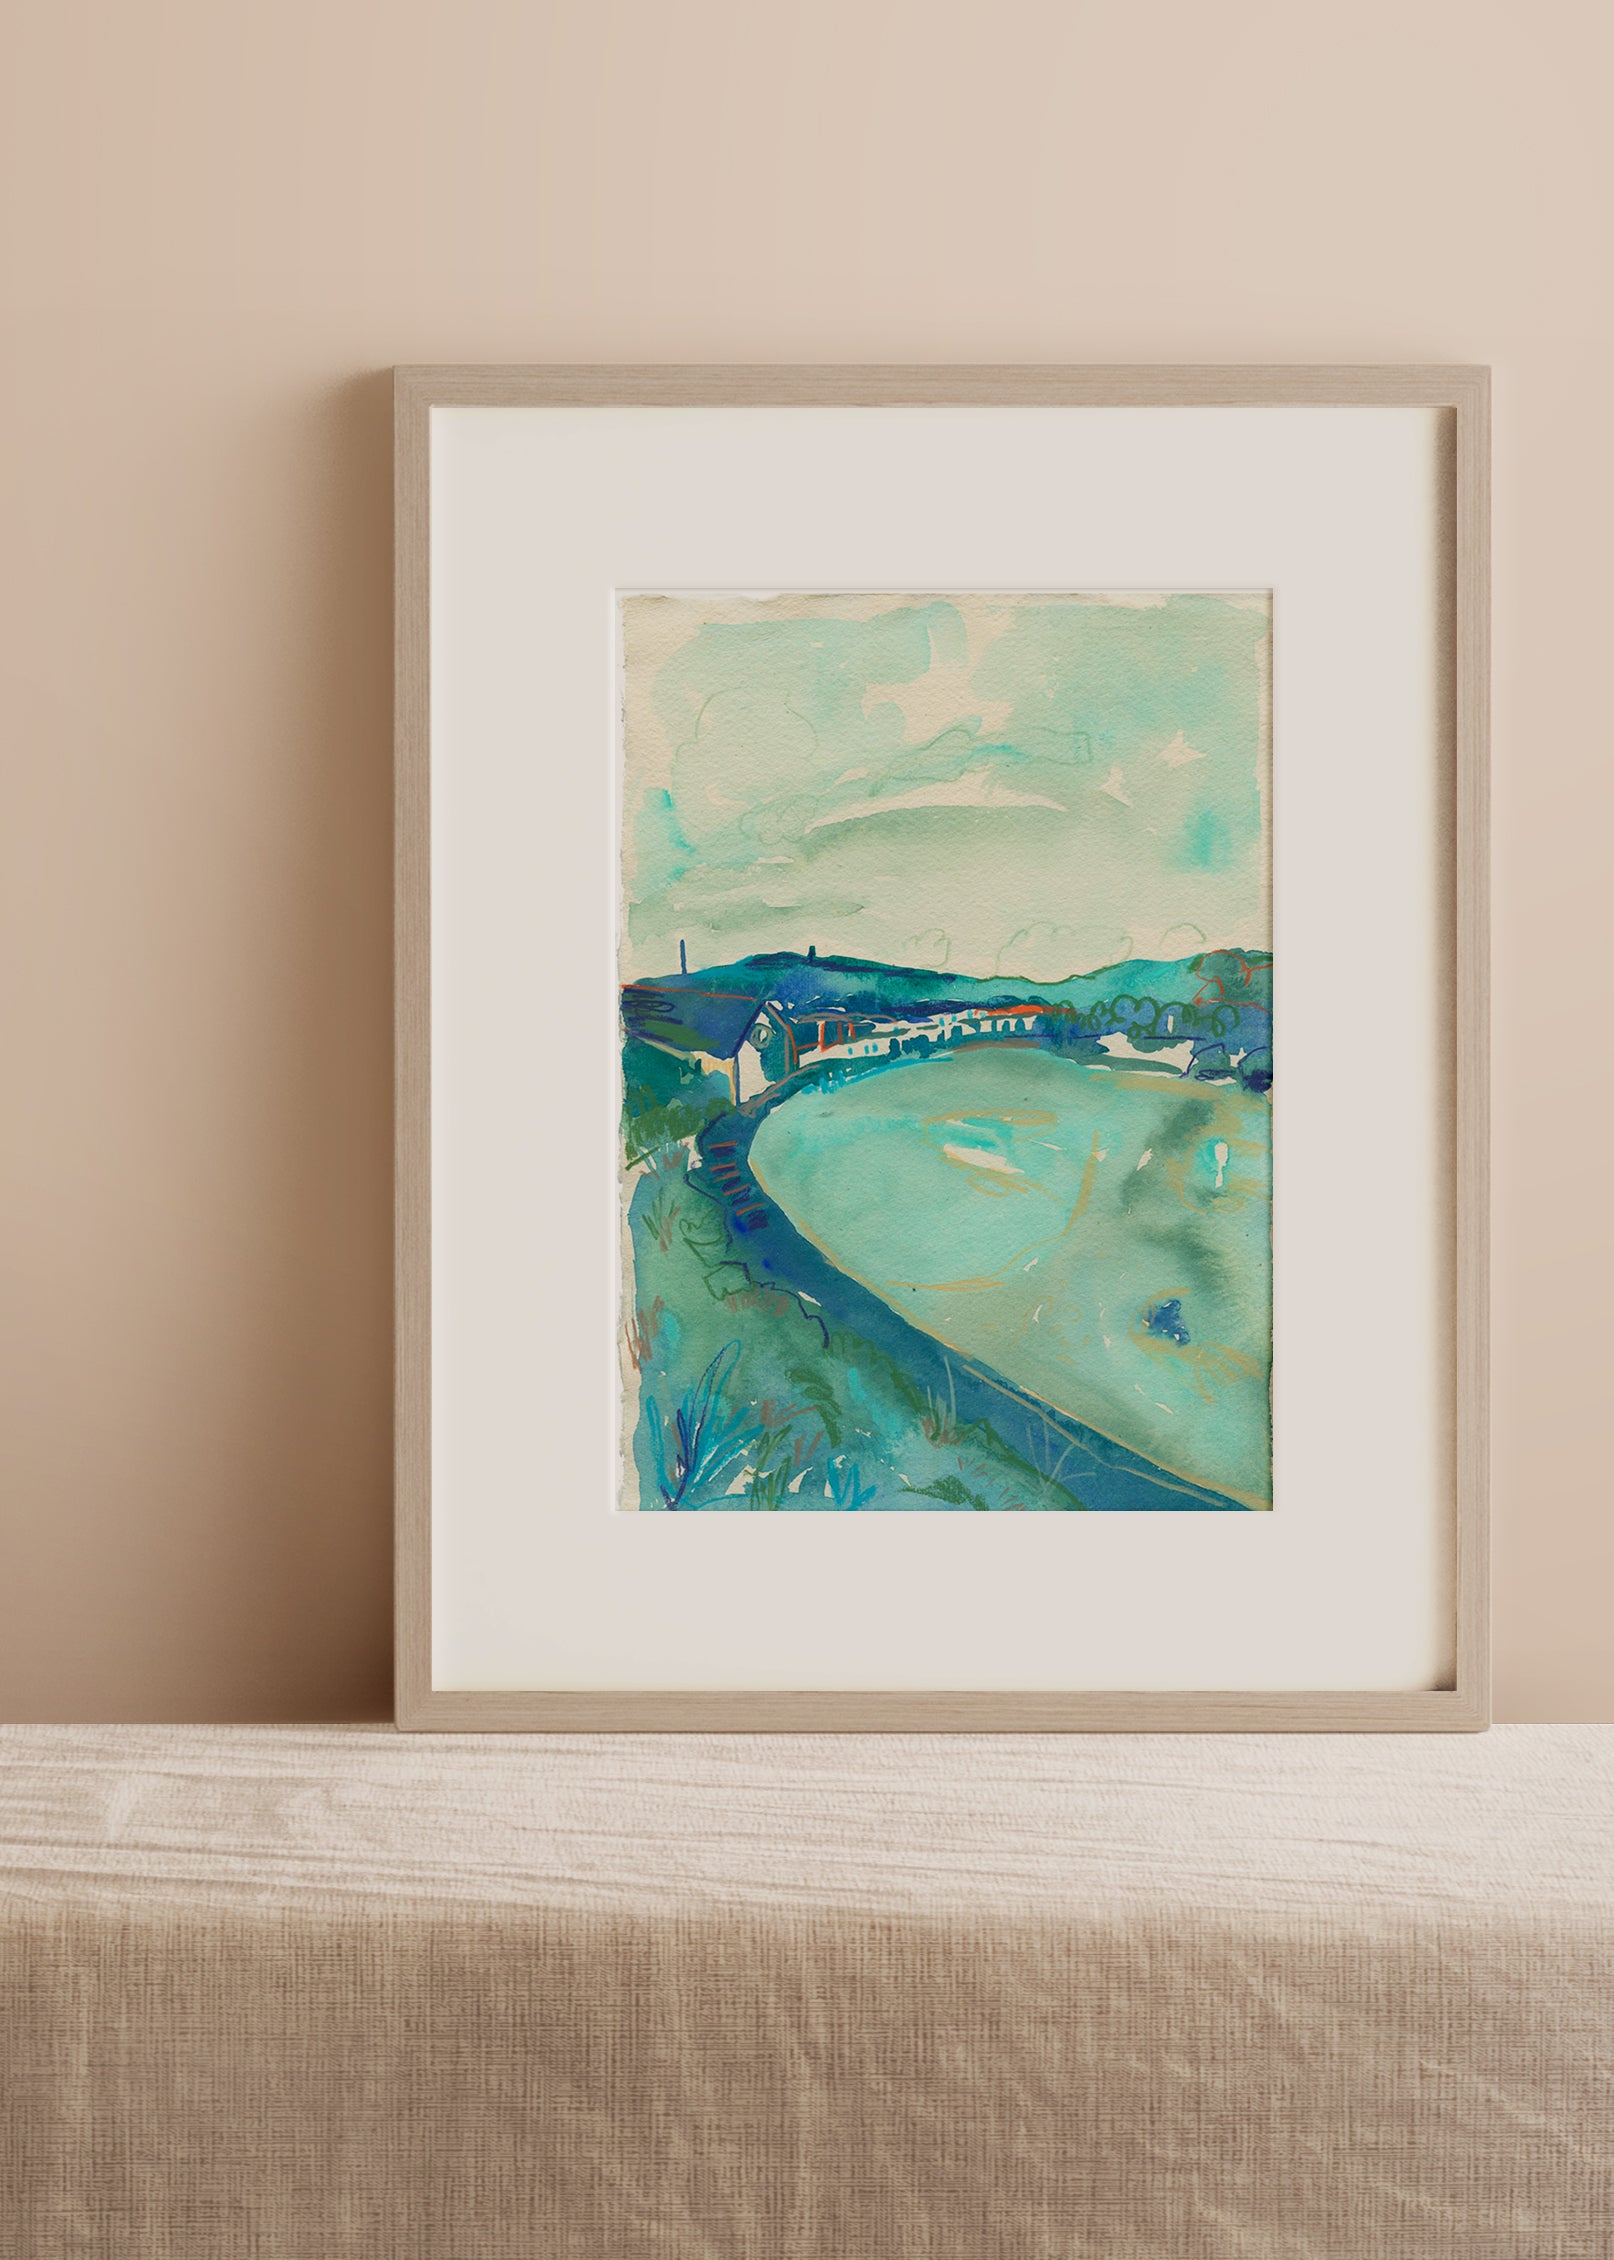 Porthwidden seascape in blue and turquoise tones by artist Lucy Williams